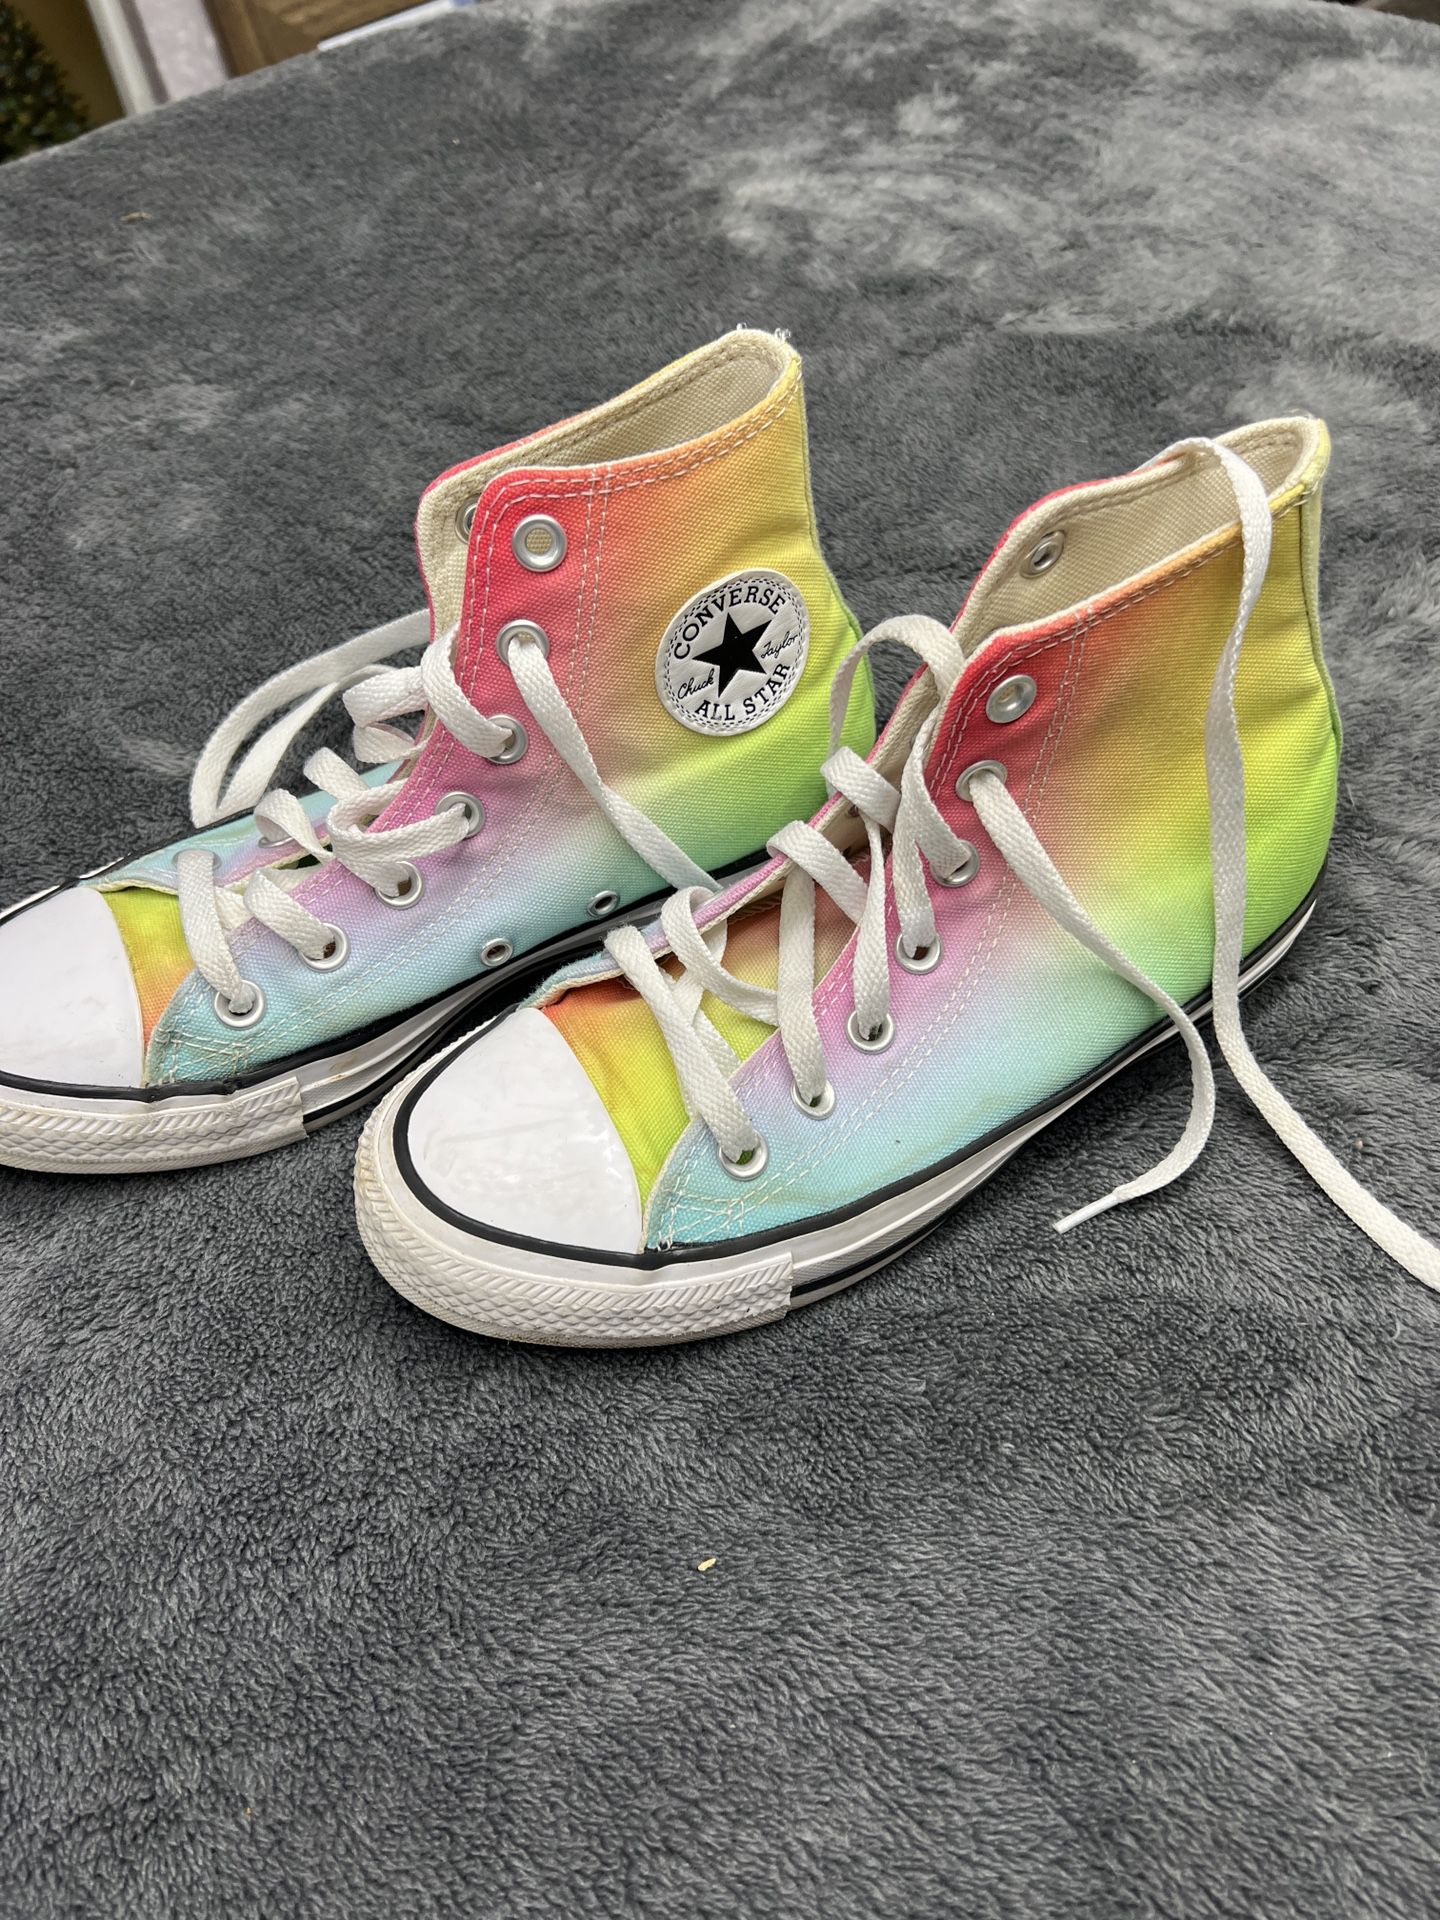 Converse All Star Unisex Shoes in good shape!  Men’s 4 or Women’s 6.  